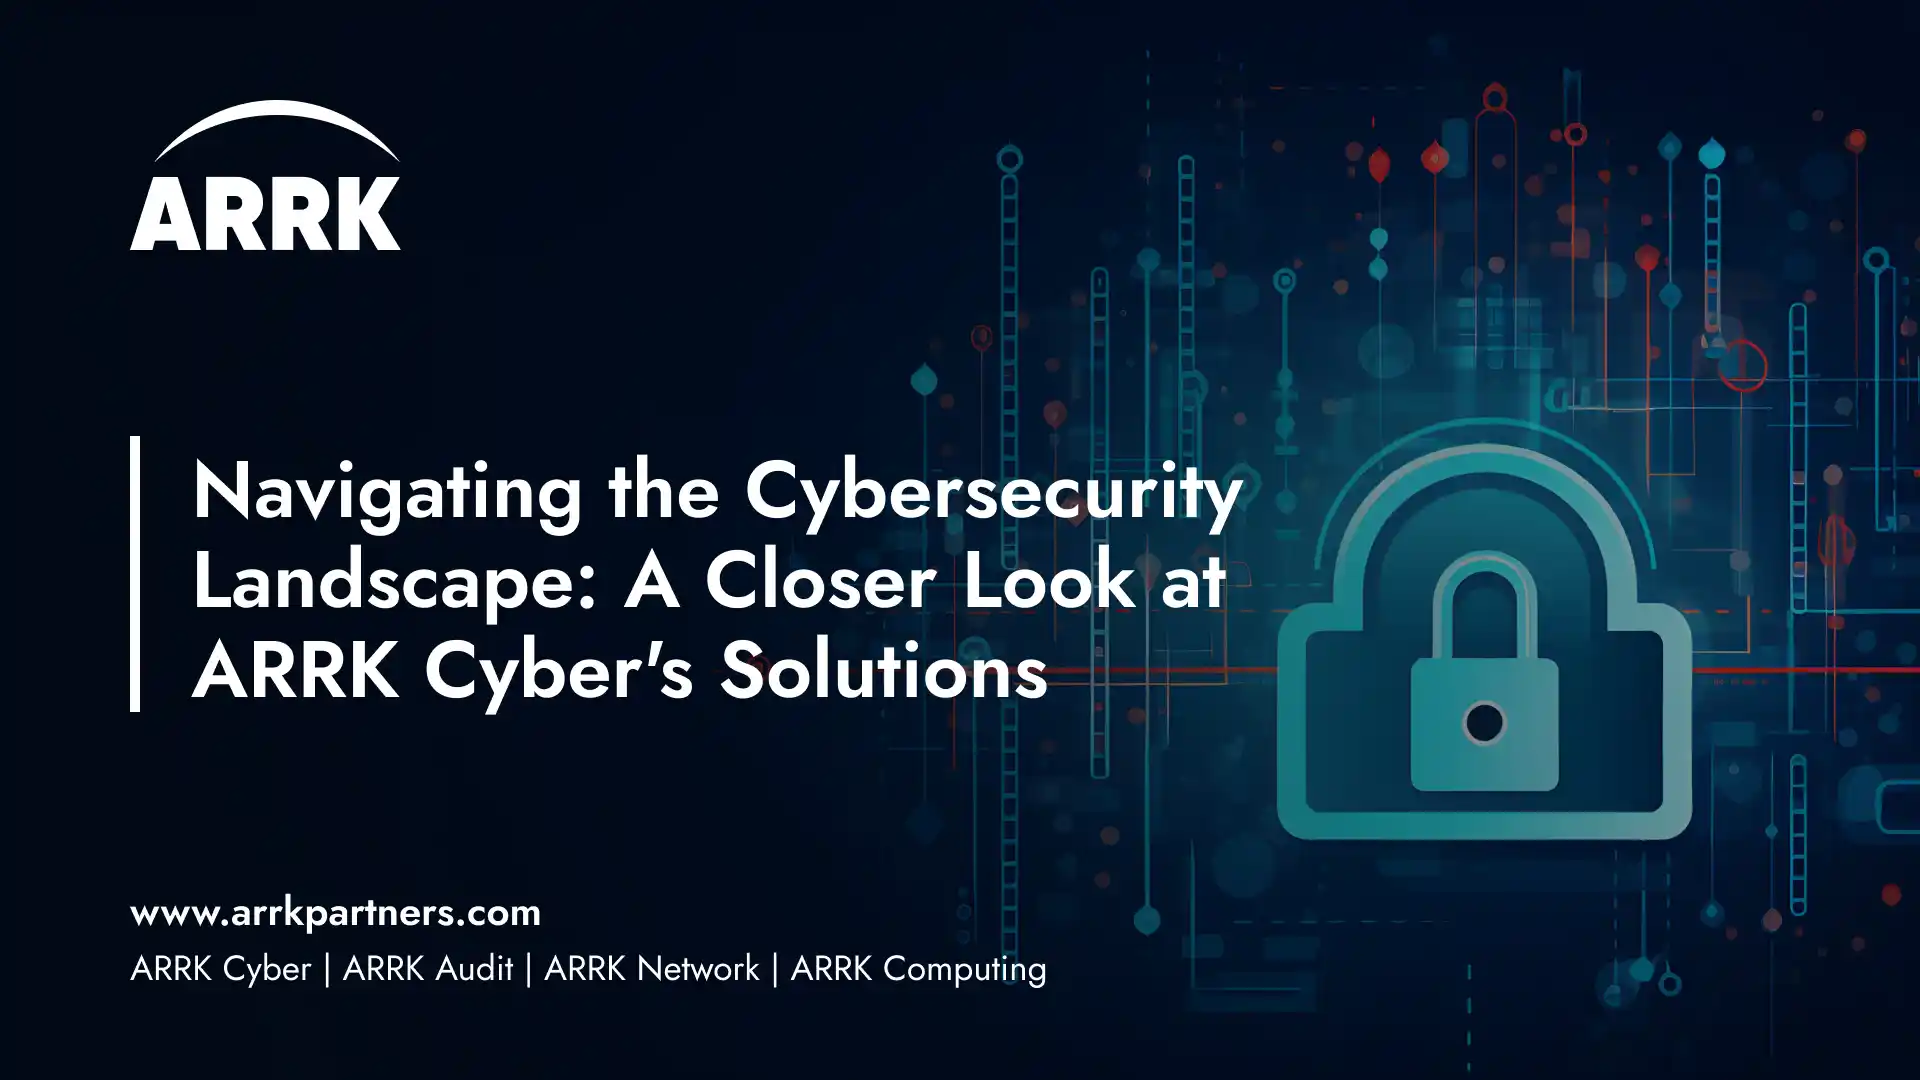 Navigating the Cybersecurity Landscape A Closer Look at ARRK Cyber's Solutions